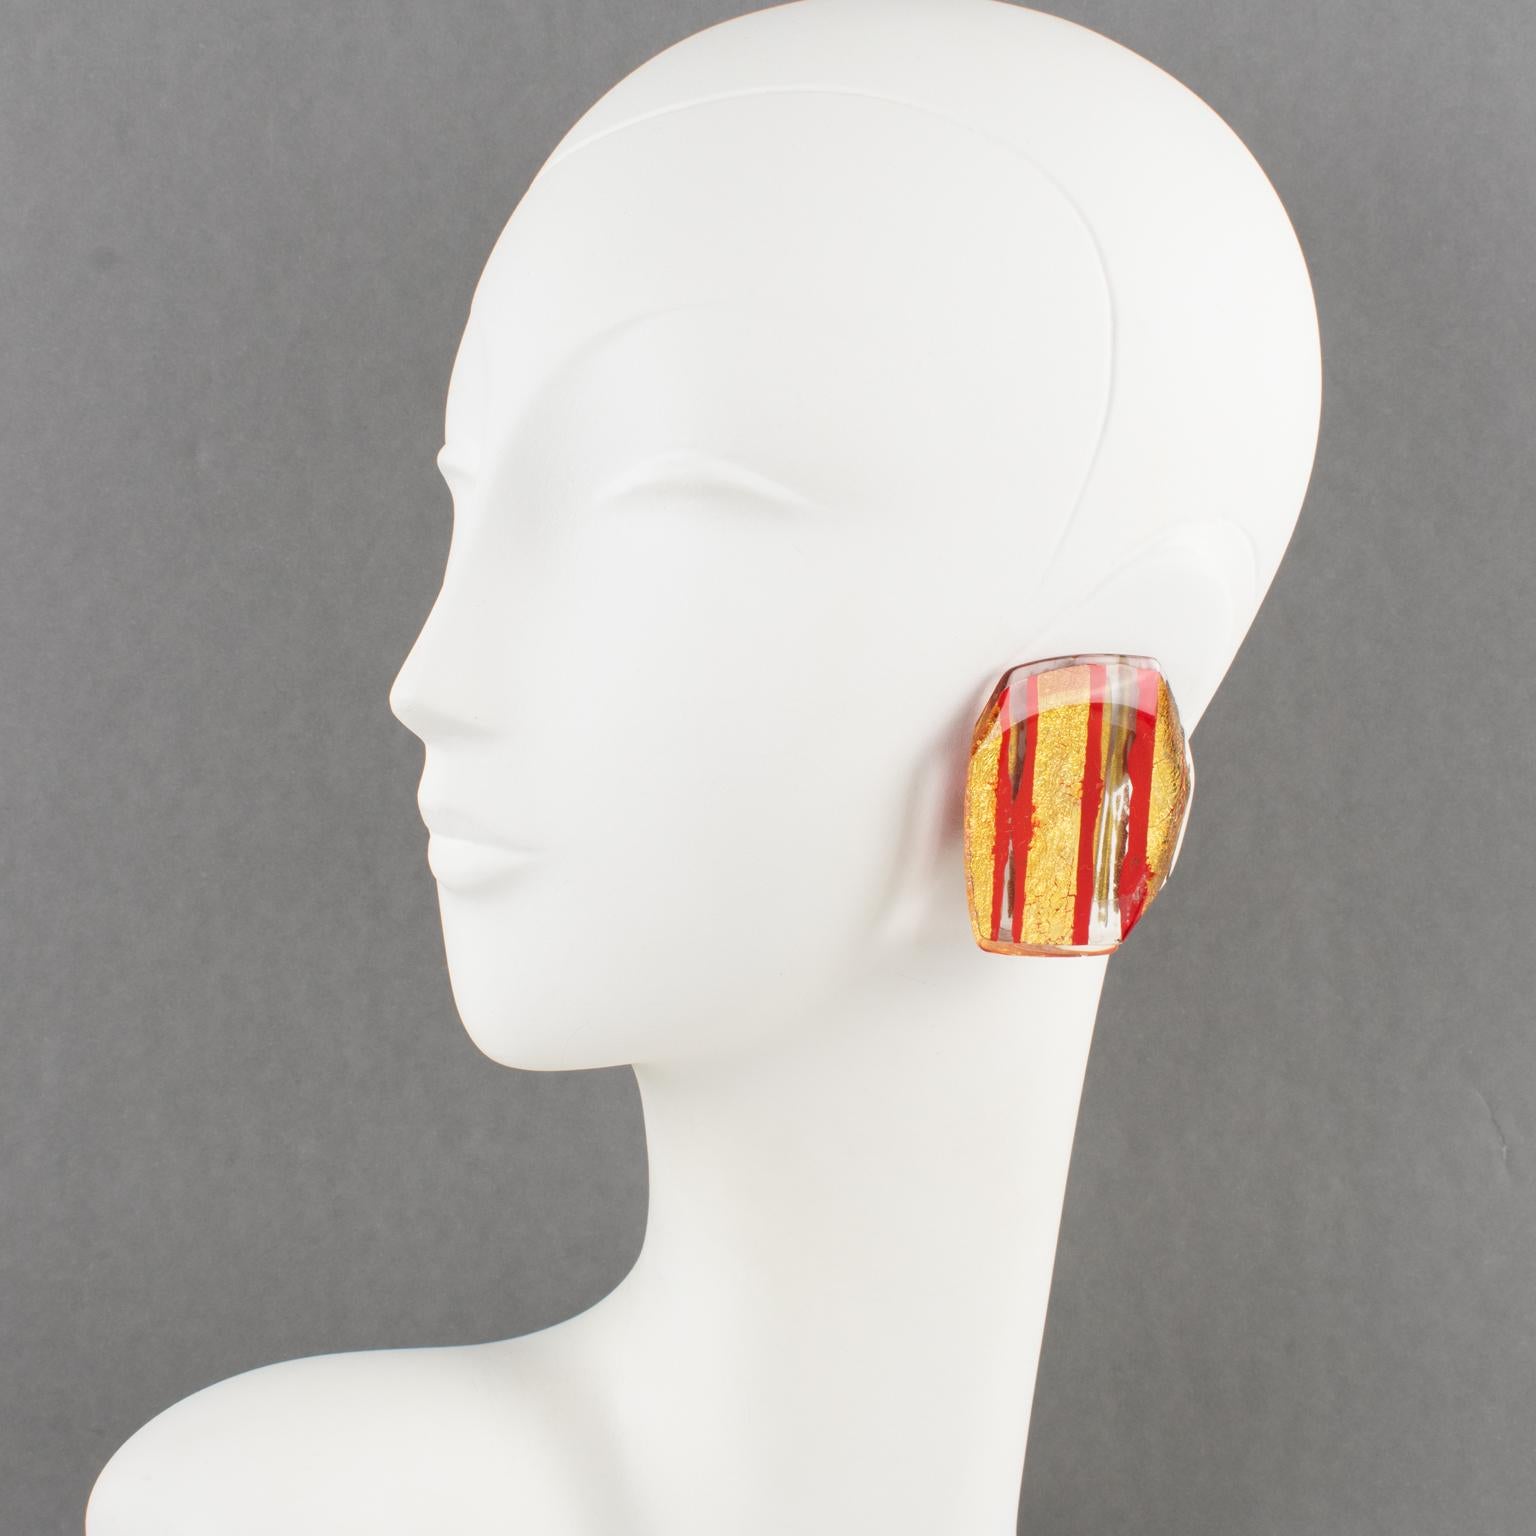 These lovely Anne and Frank Vigneri Lucite clip-on earrings feature an oversized dimensional geometric design, all faceted and carved. The design boasts crystal clear Lucite with a red striped pattern and gold metallic foil inclusions. There is no